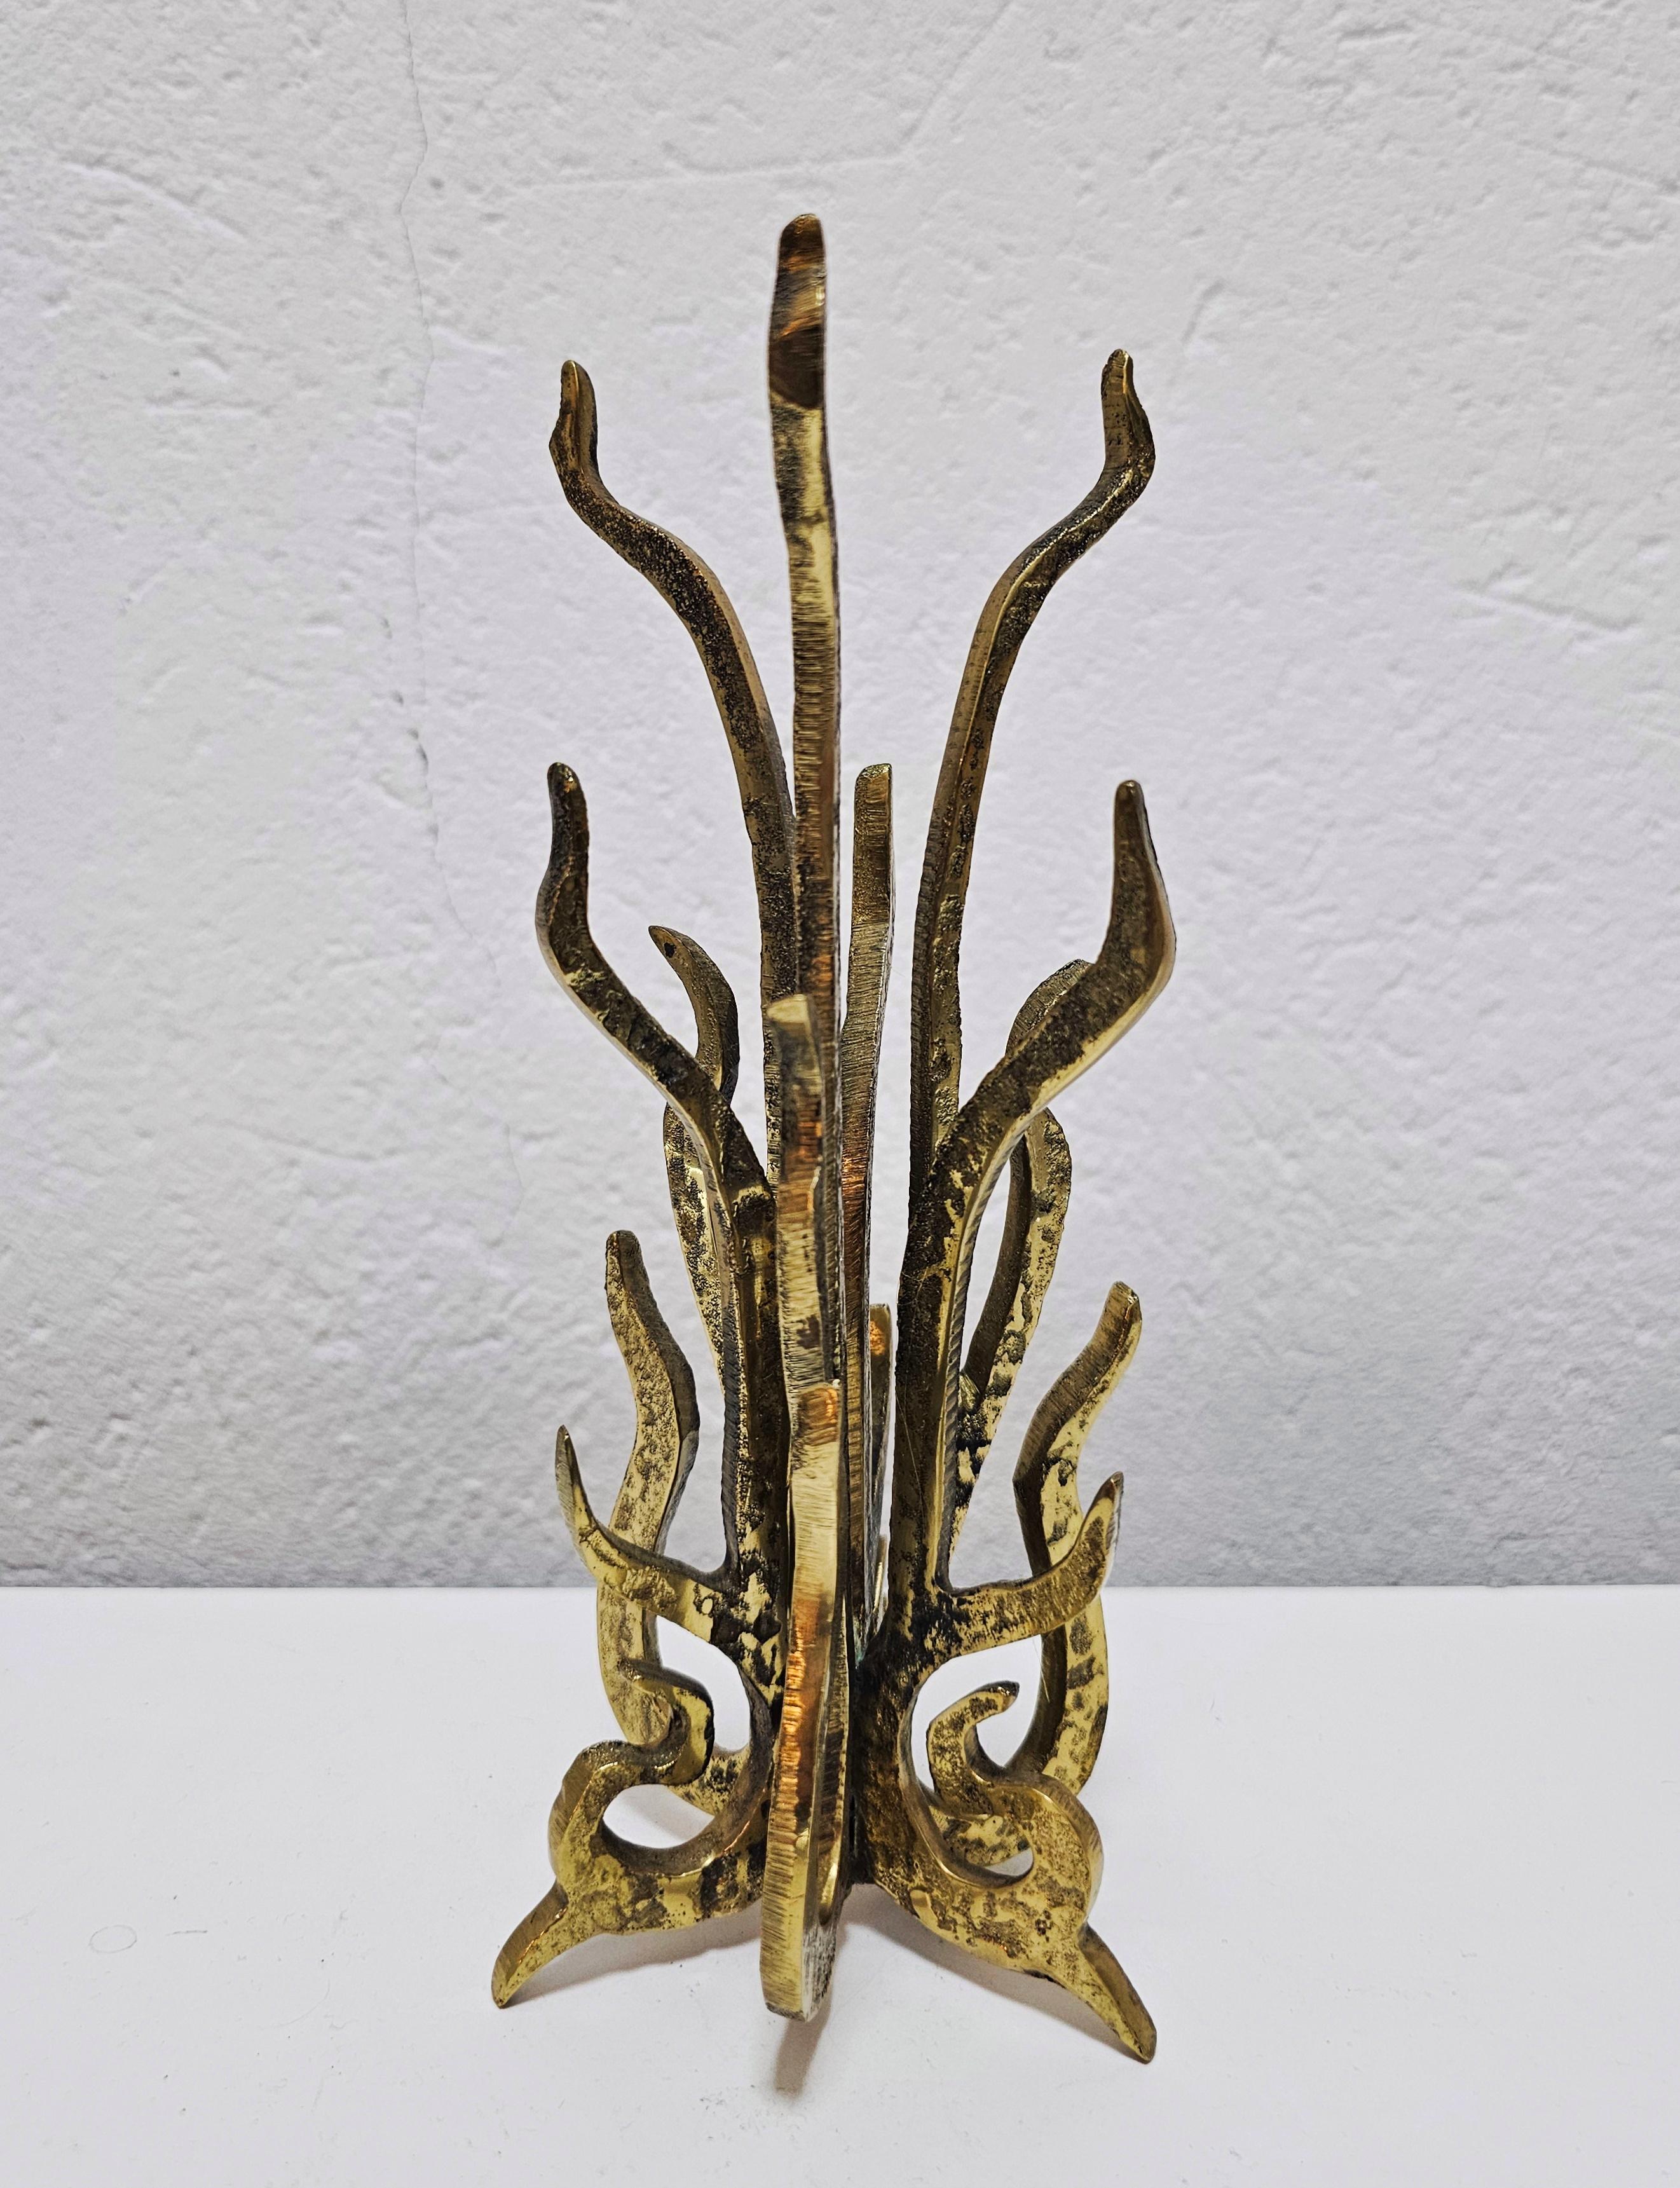 In this listing you will find an extremely rare and absolutely extraordinary sculptural Brutalist candle holder done in gilt bronze, shaped as a coral. It was designed by Austrian designer Heinz Goll, who's work is often found at auctions in some of